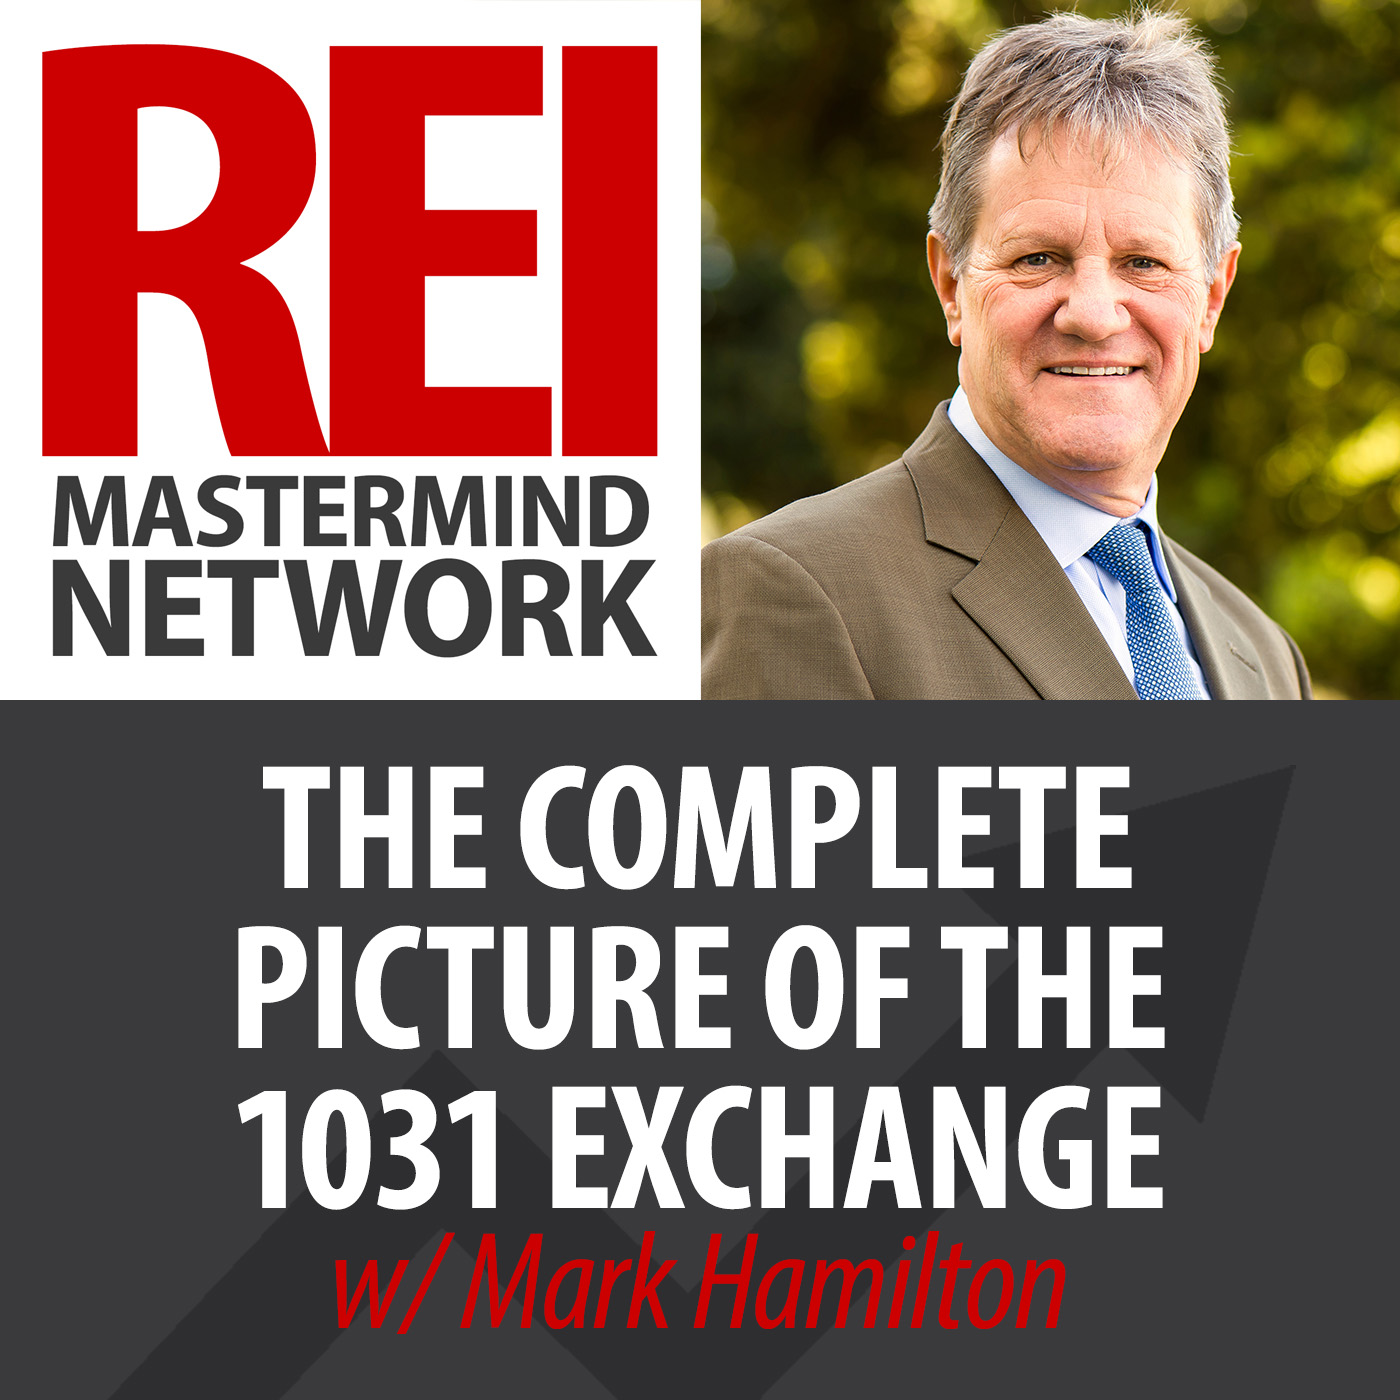 The Complete Picture of the 1031 Exchange with Mark Hamilton